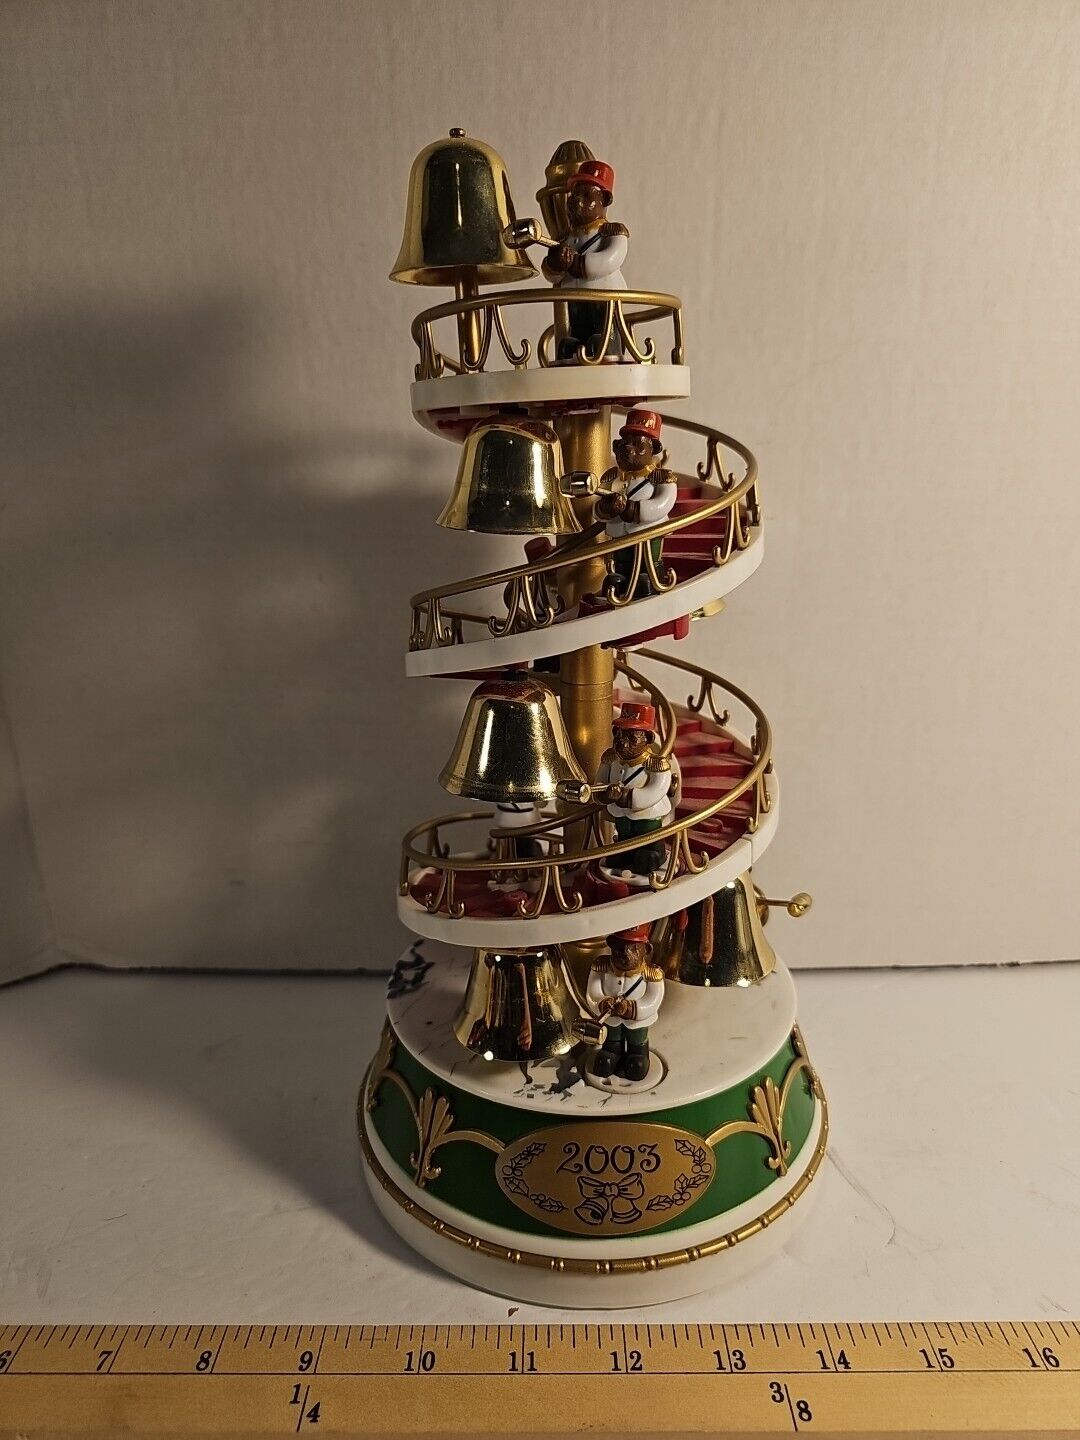 2003 Bear Band Spiral Staircase Christmas Tower Plays 3 Songs Music